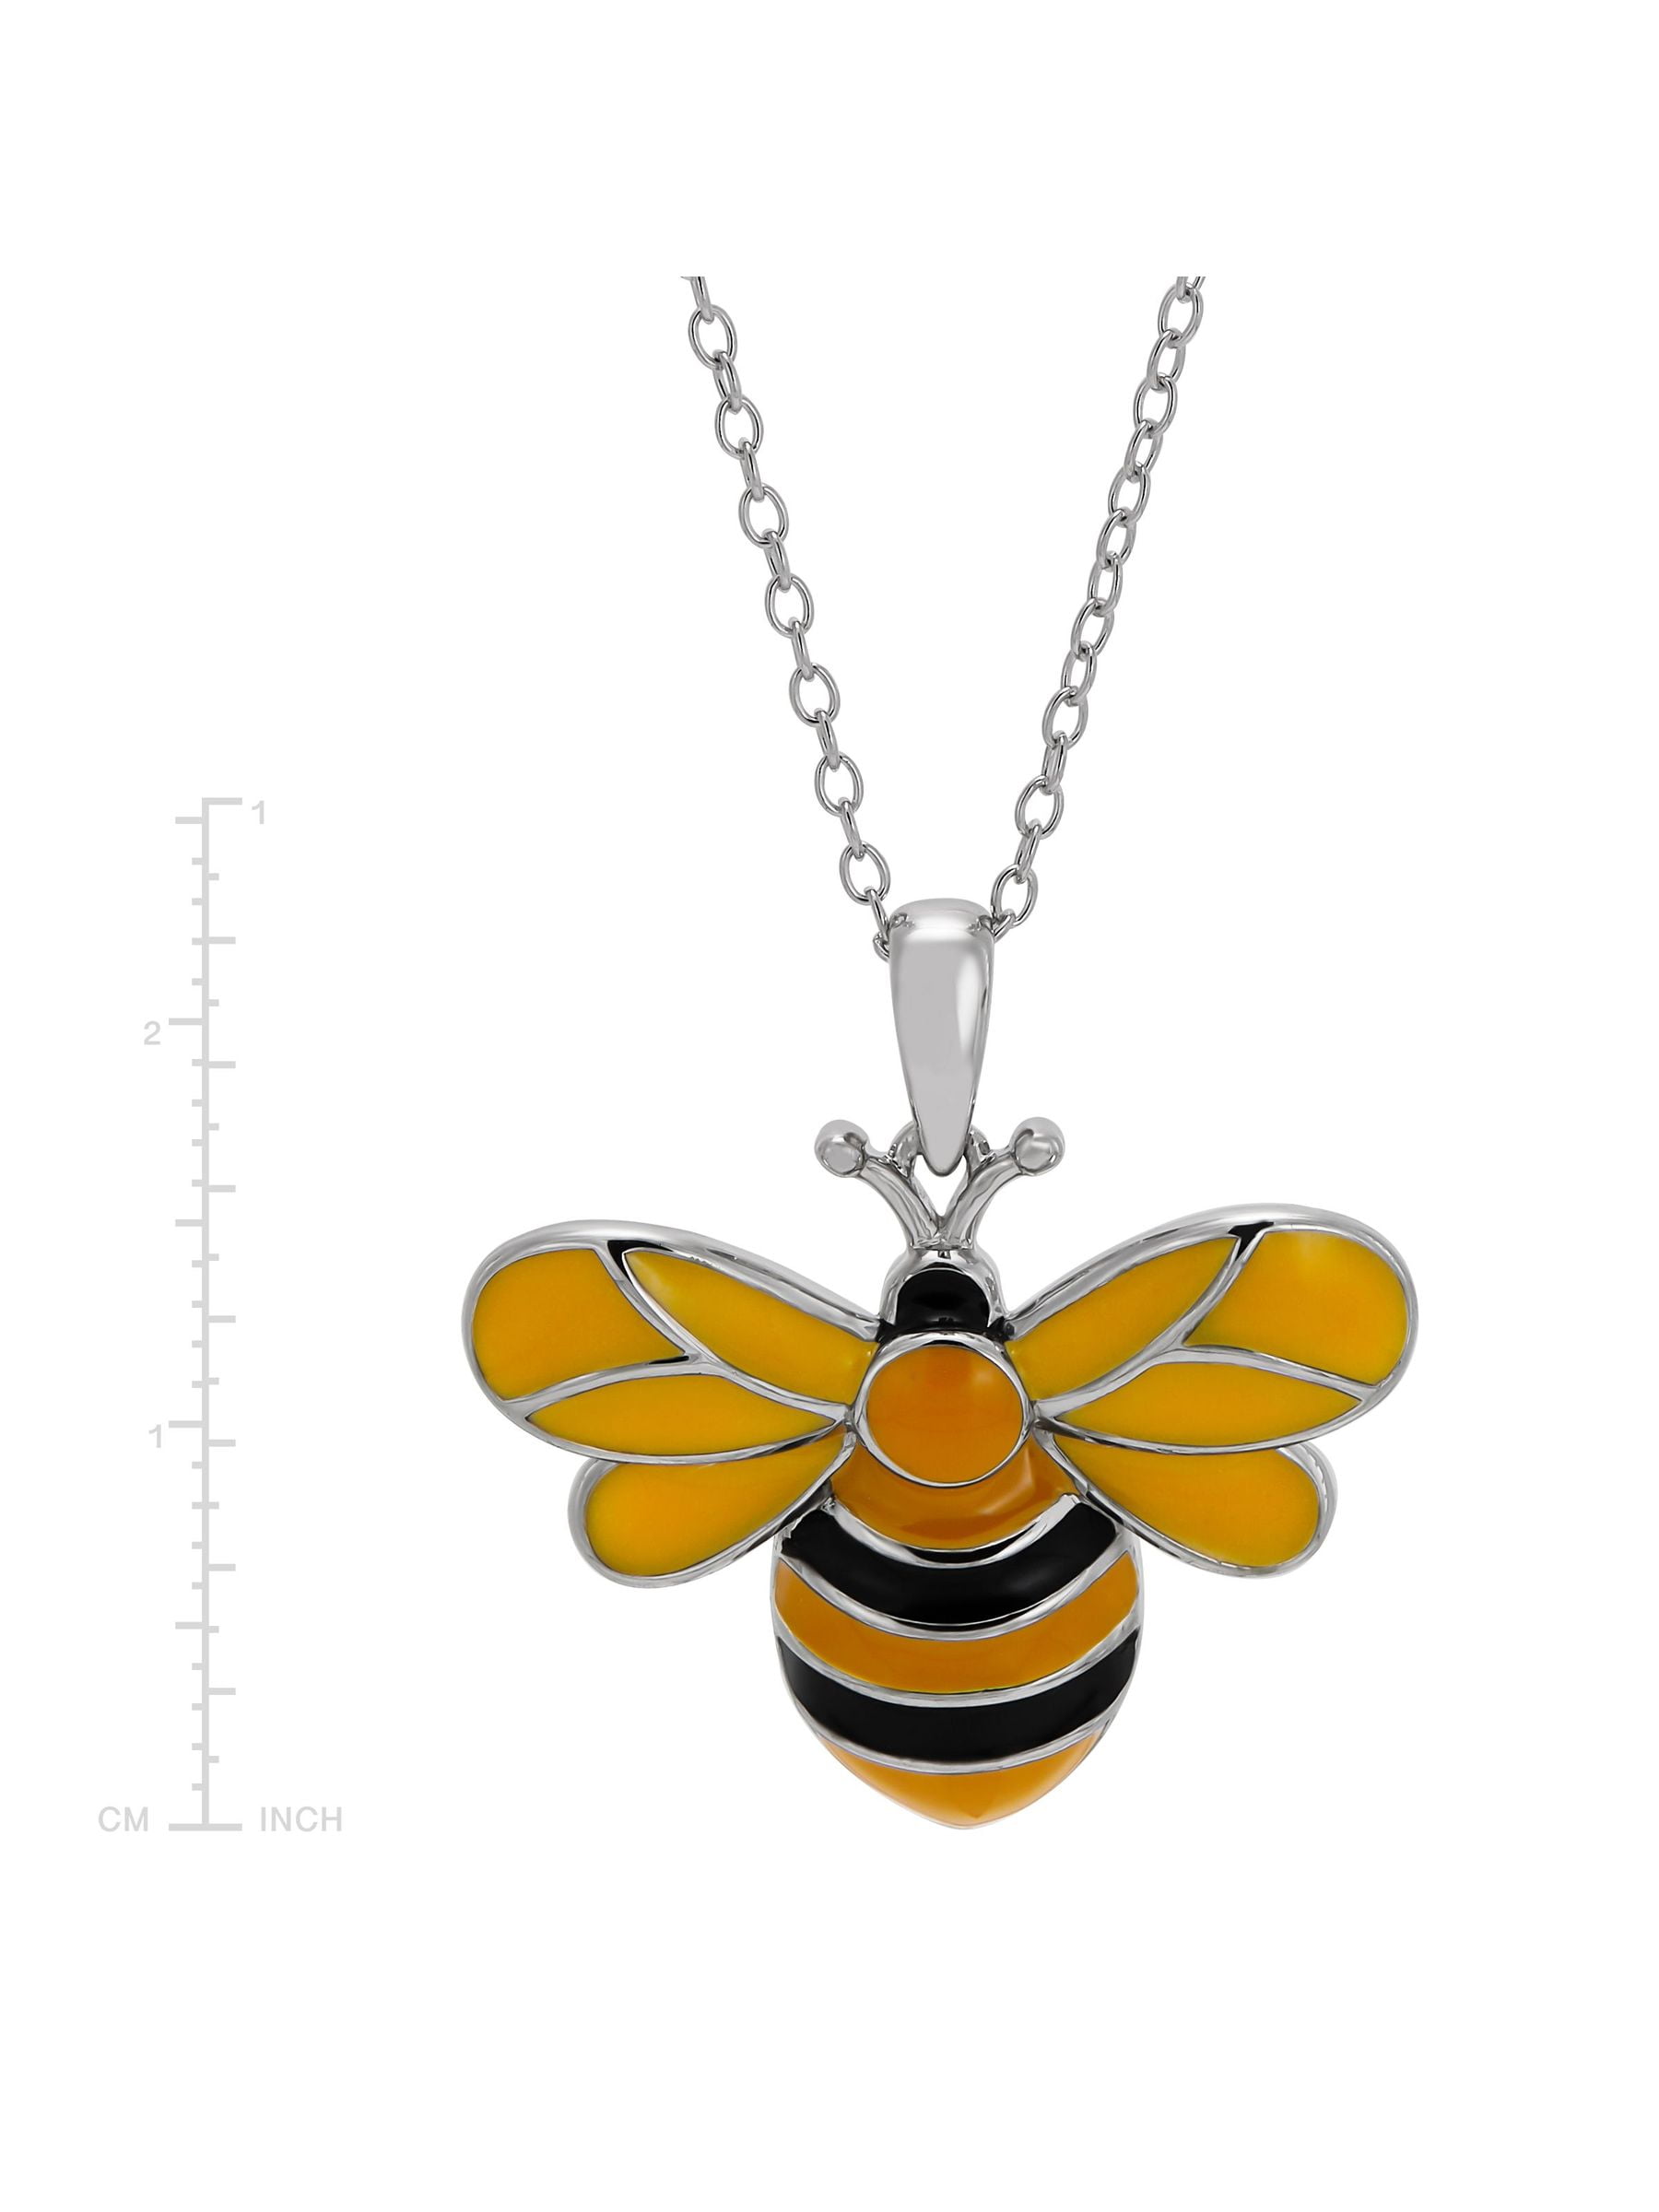 Bumble Bee Women 925 Sterling Silver Pendant FREE GIFT BOX